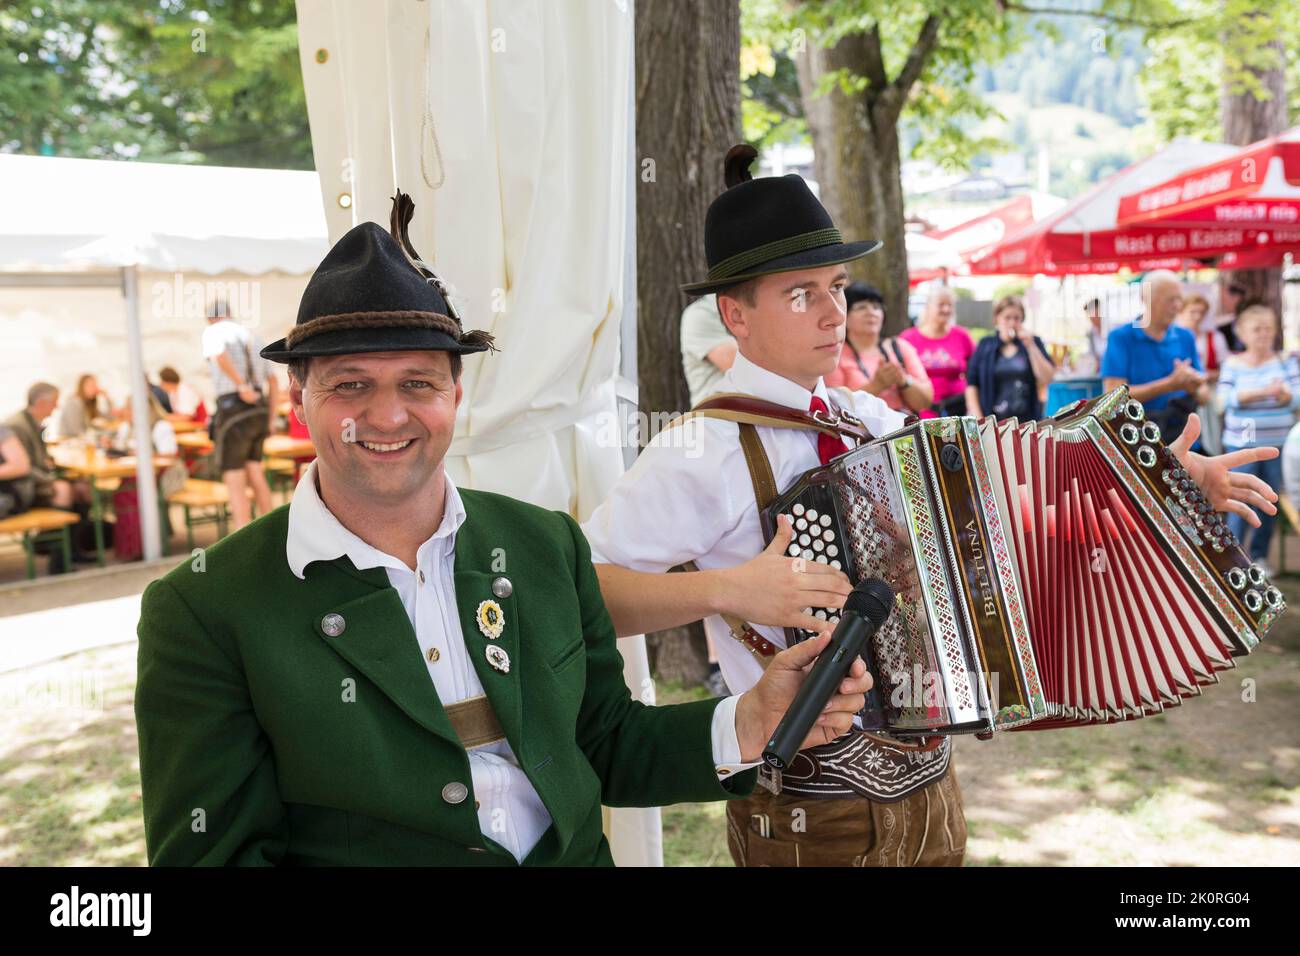 Musician playing folk music in Tirol costume at a feast in the park, Zell am See, Austria Stock Photo